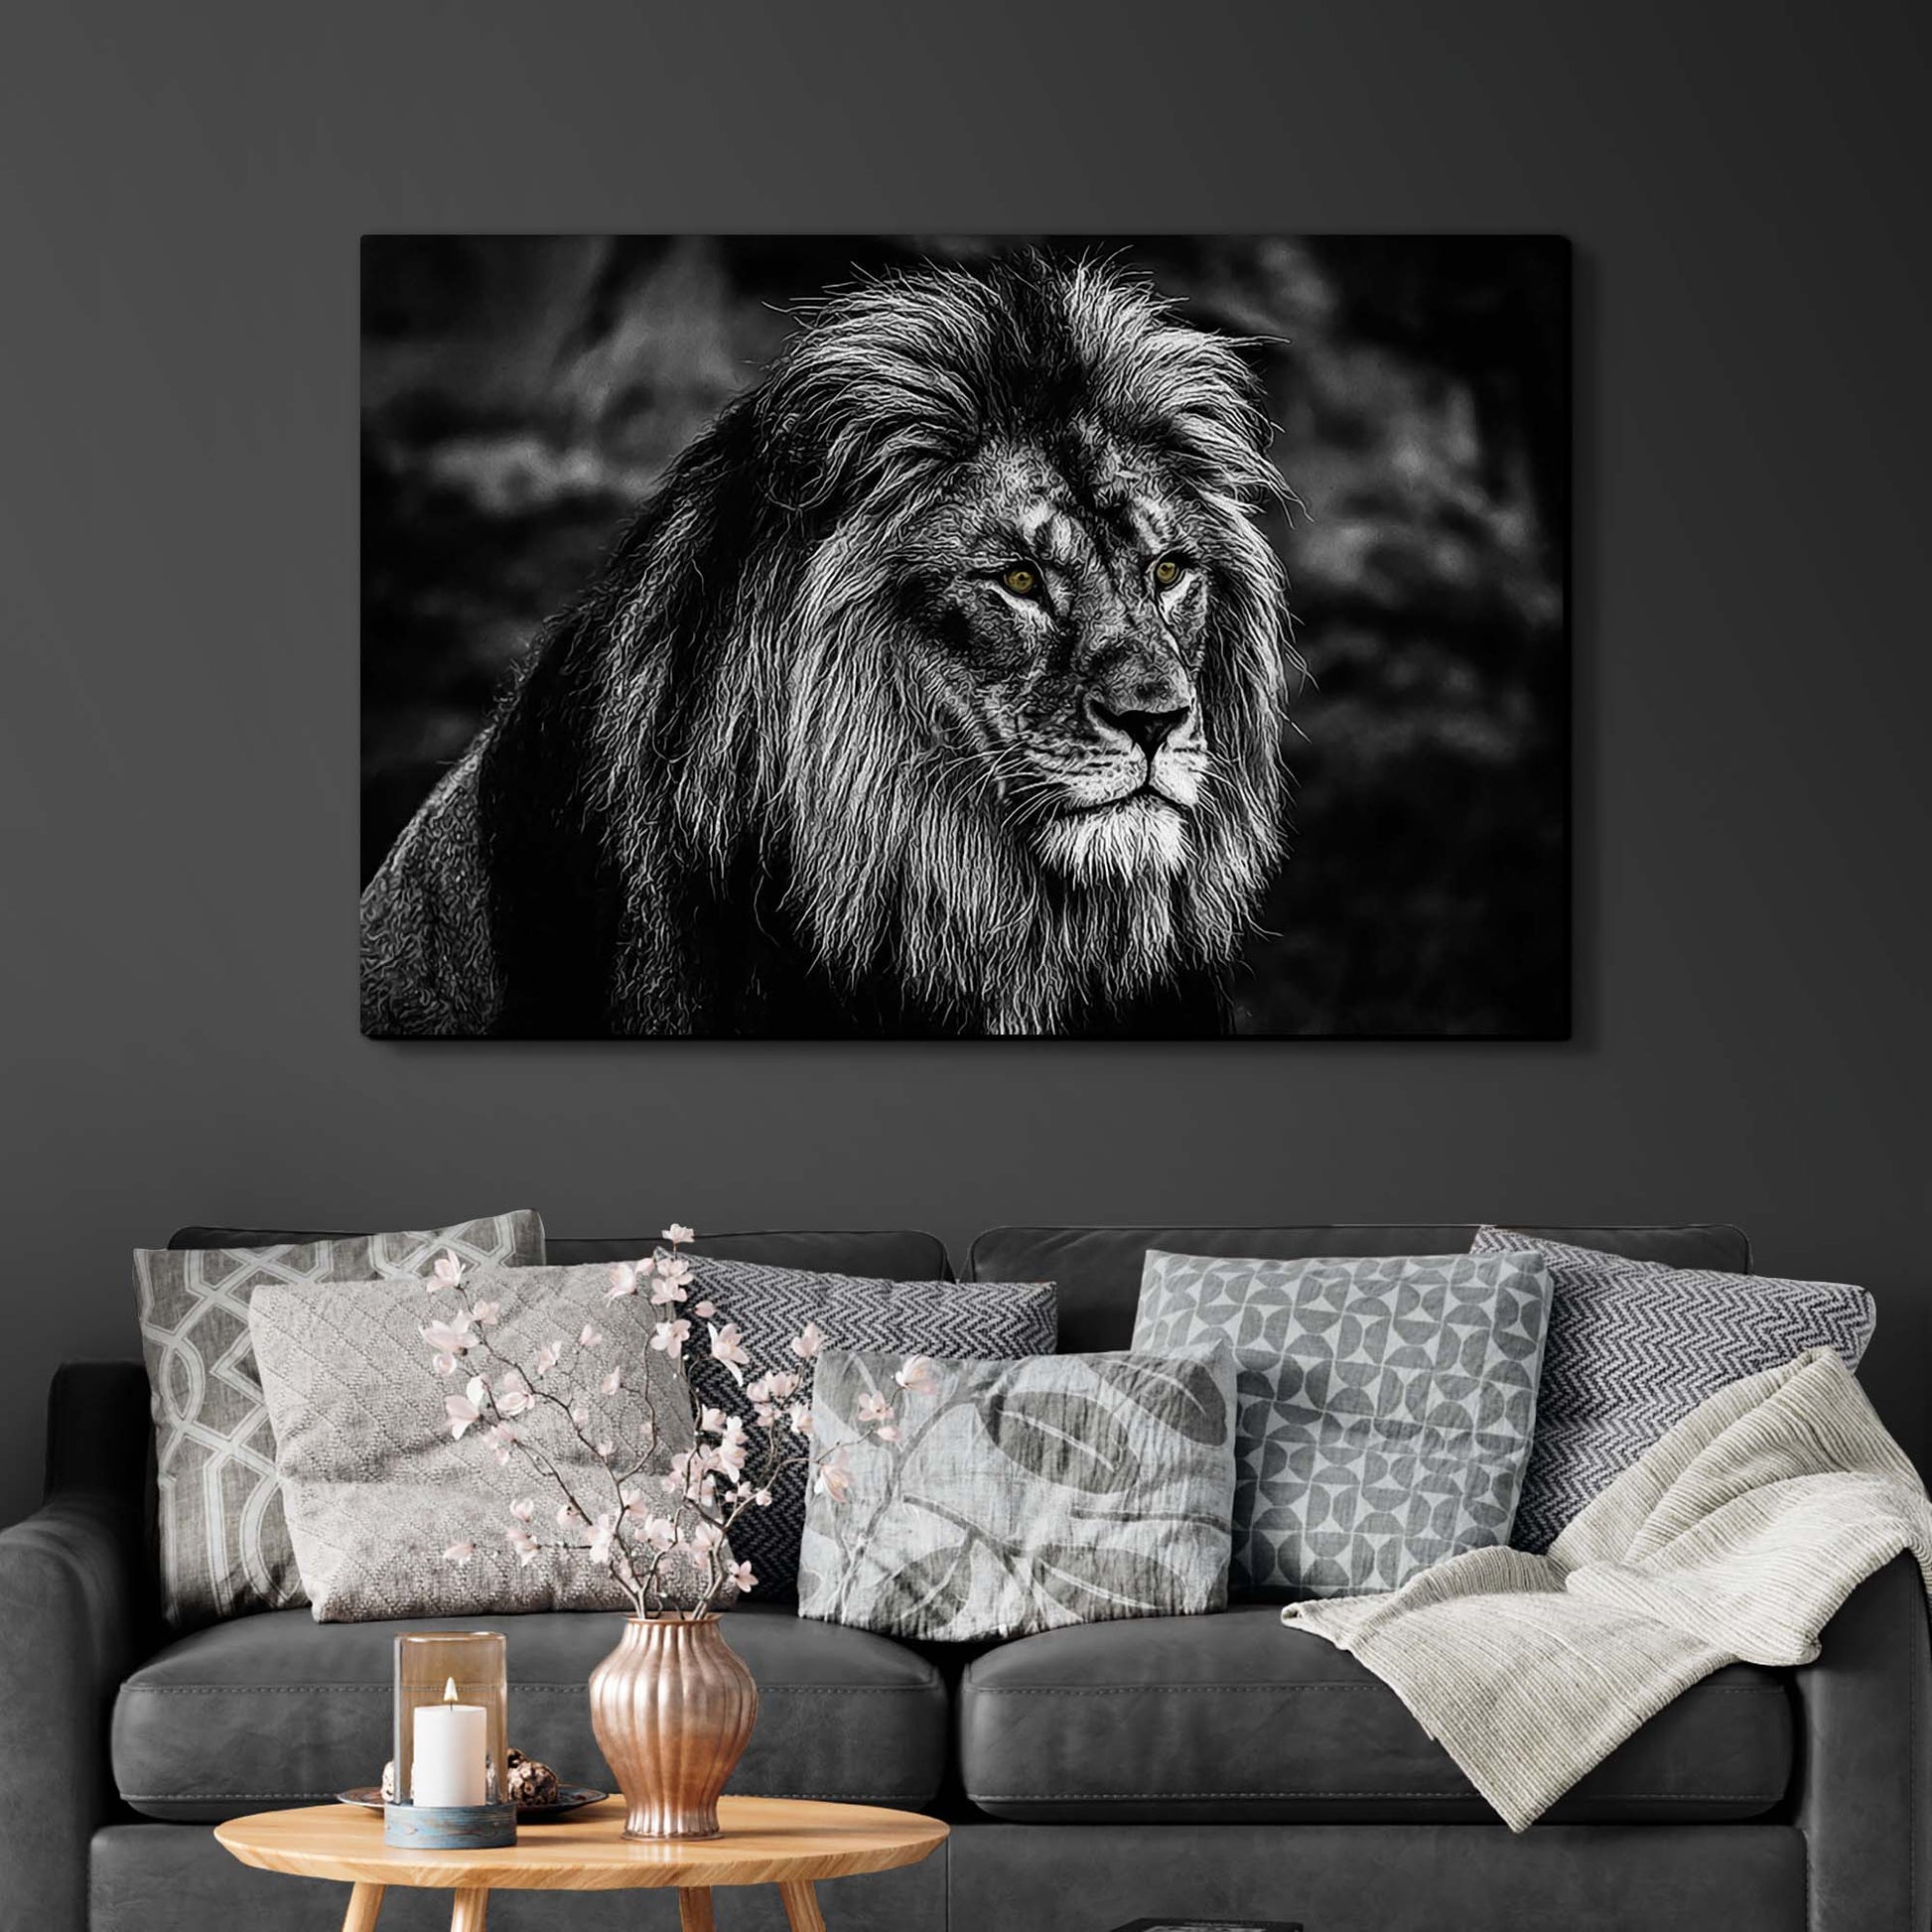 Black and White Golden-Eyed Lion Canvas Wall Art - Image by Tailored Canvases